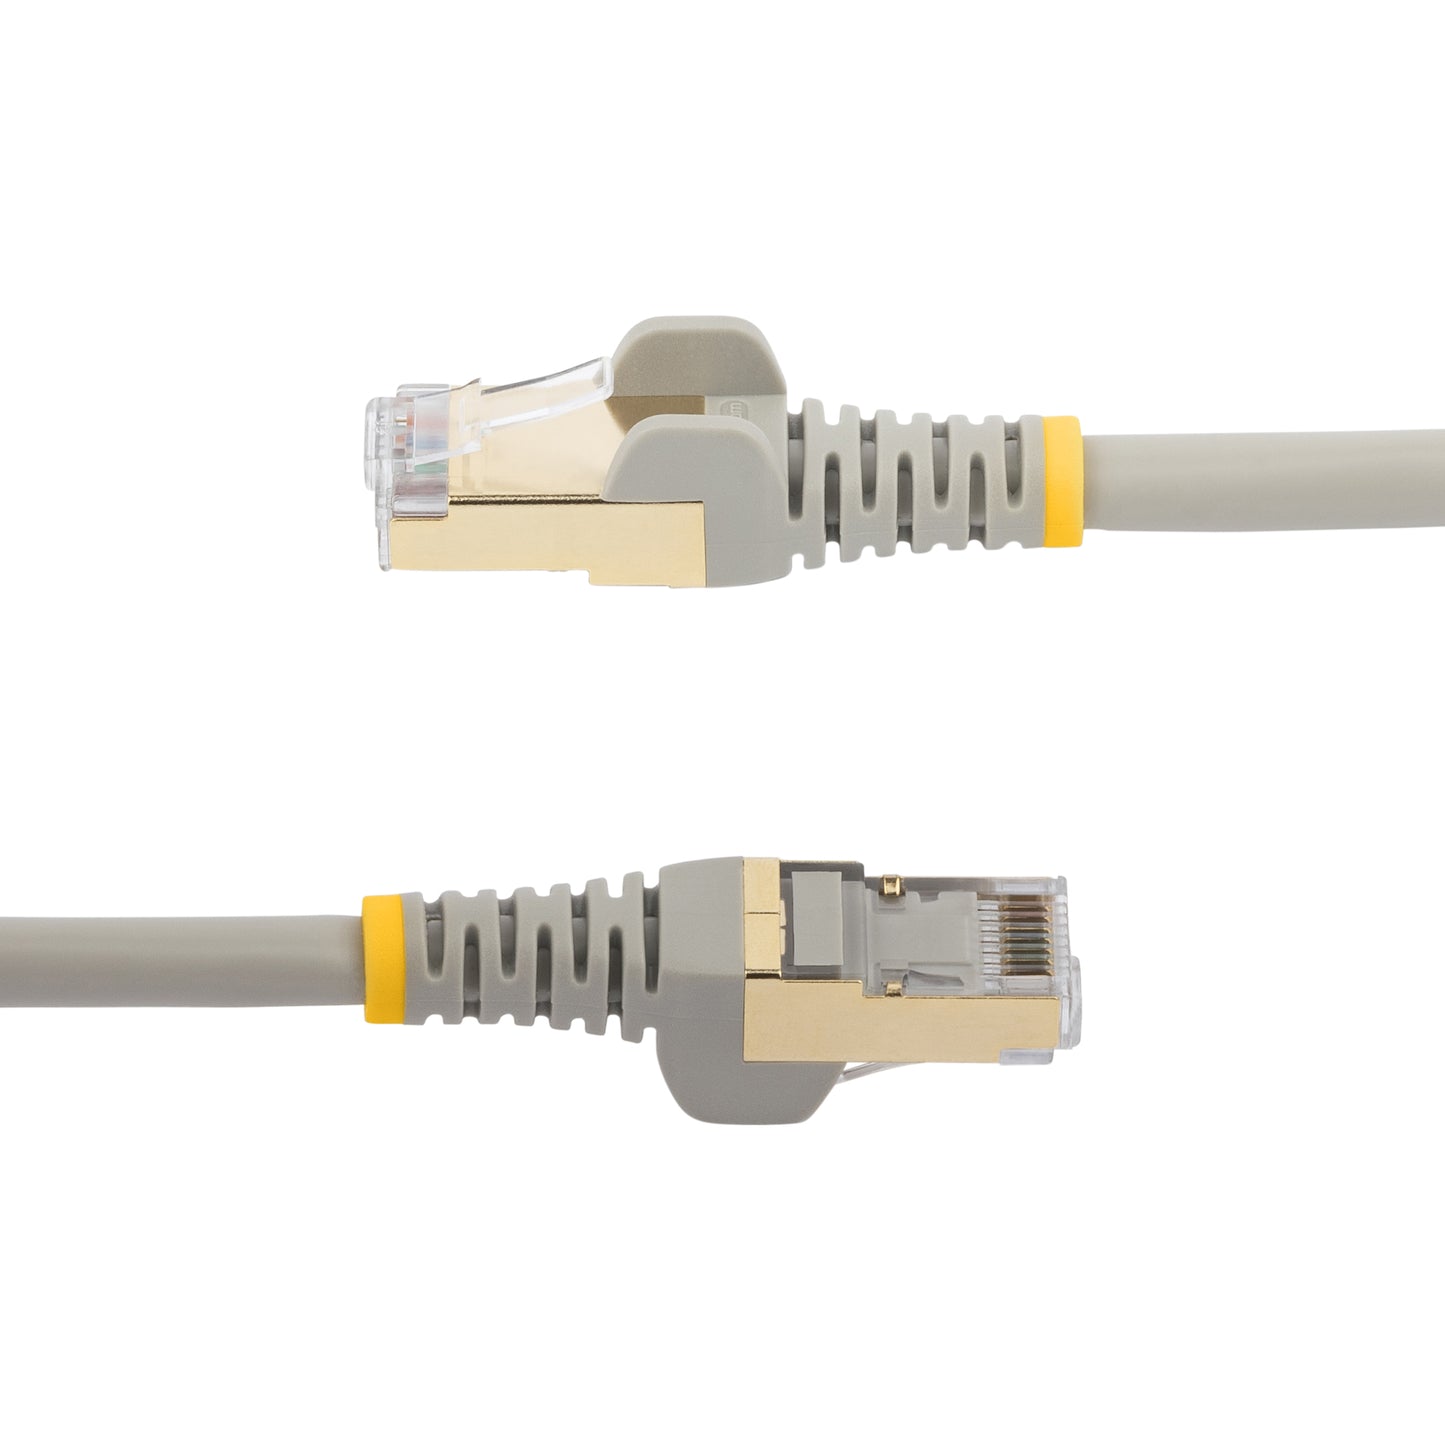 StarTech.com 3m CAT6a Ethernet Cable - 10 Gigabit Shielded Snagless RJ45 100W PoE Patch Cord - 10GbE STP Network Cable w/Strain Relief - Grey Fluke Tested/Wiring is UL Certified/TIA-1